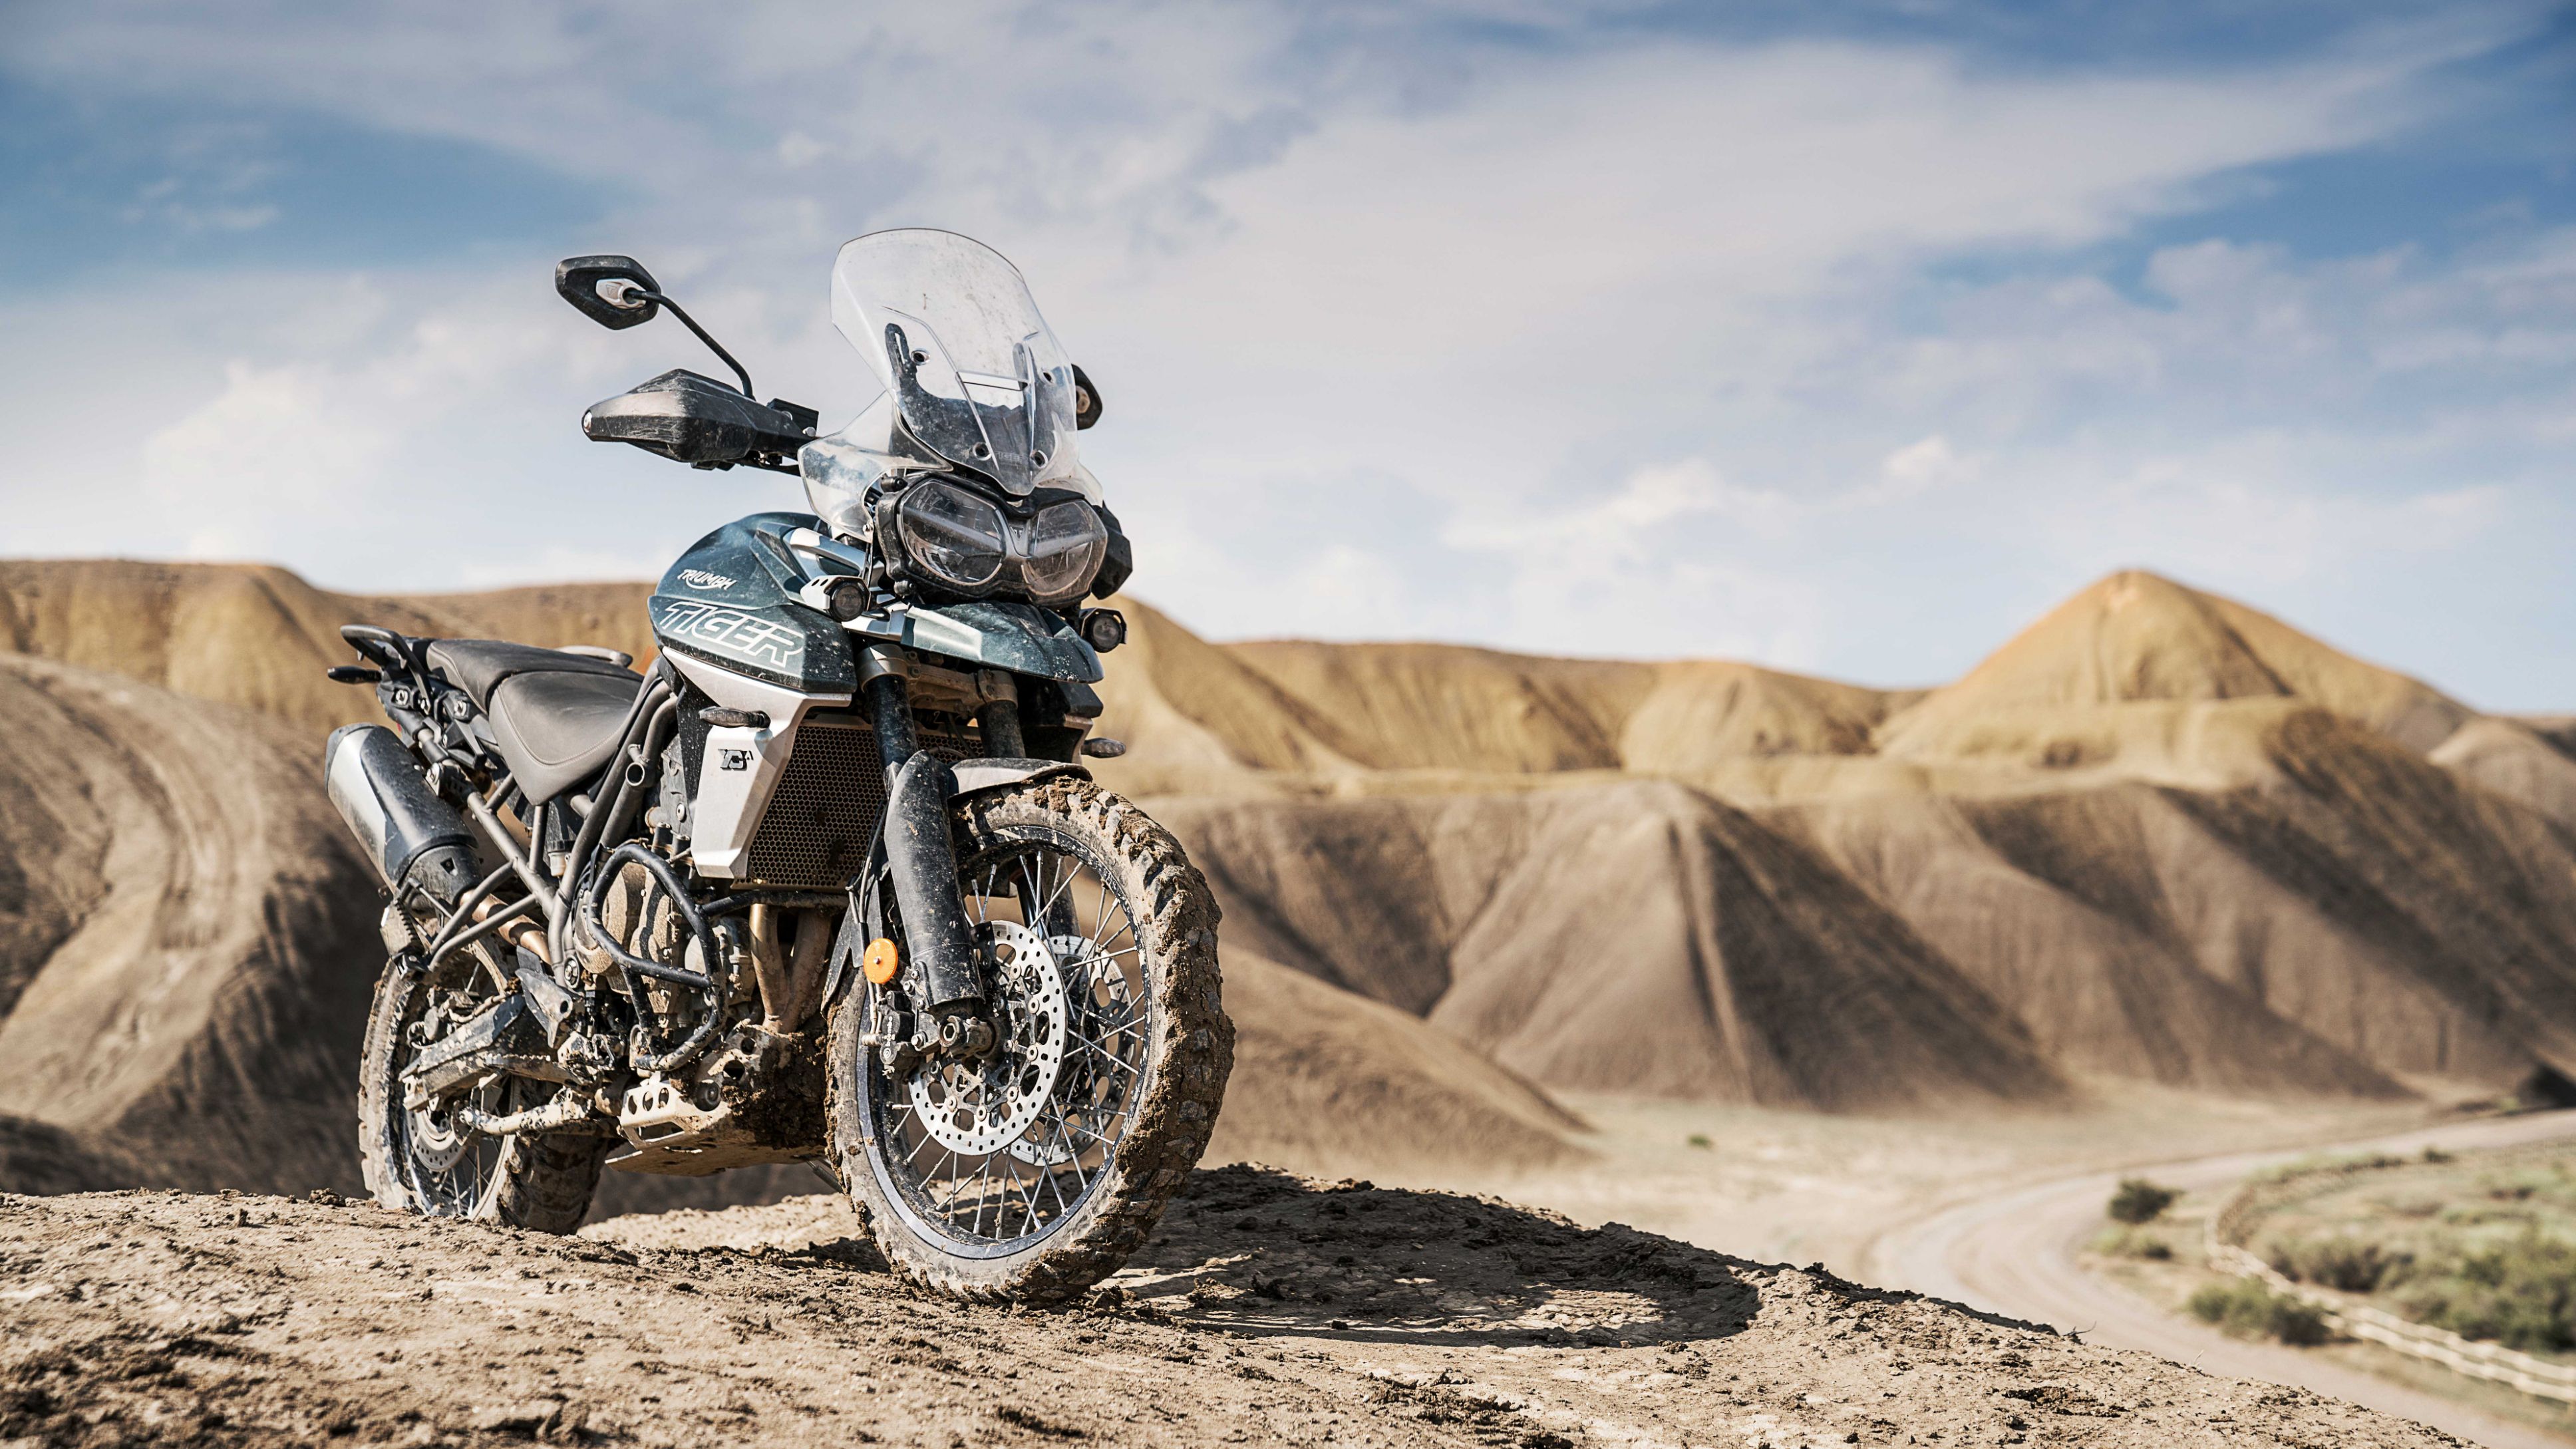 Wildcat: Triumph’s newly launched Tiger 800 XCA is an off-road beast